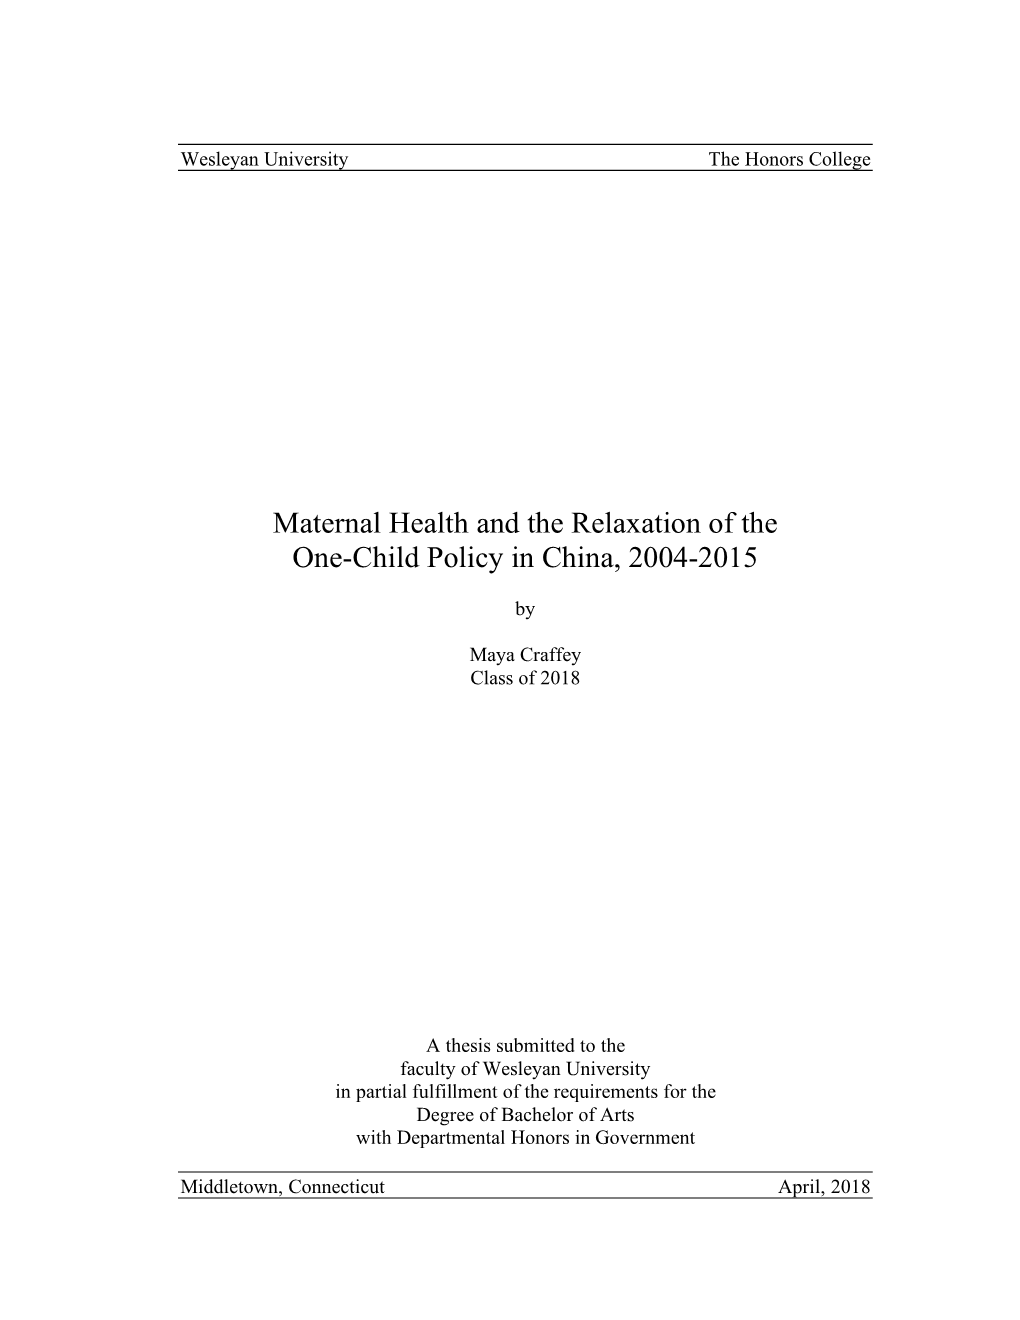 Maternal Health and the Relaxation of the One-Child Policy in China, 2004-2015